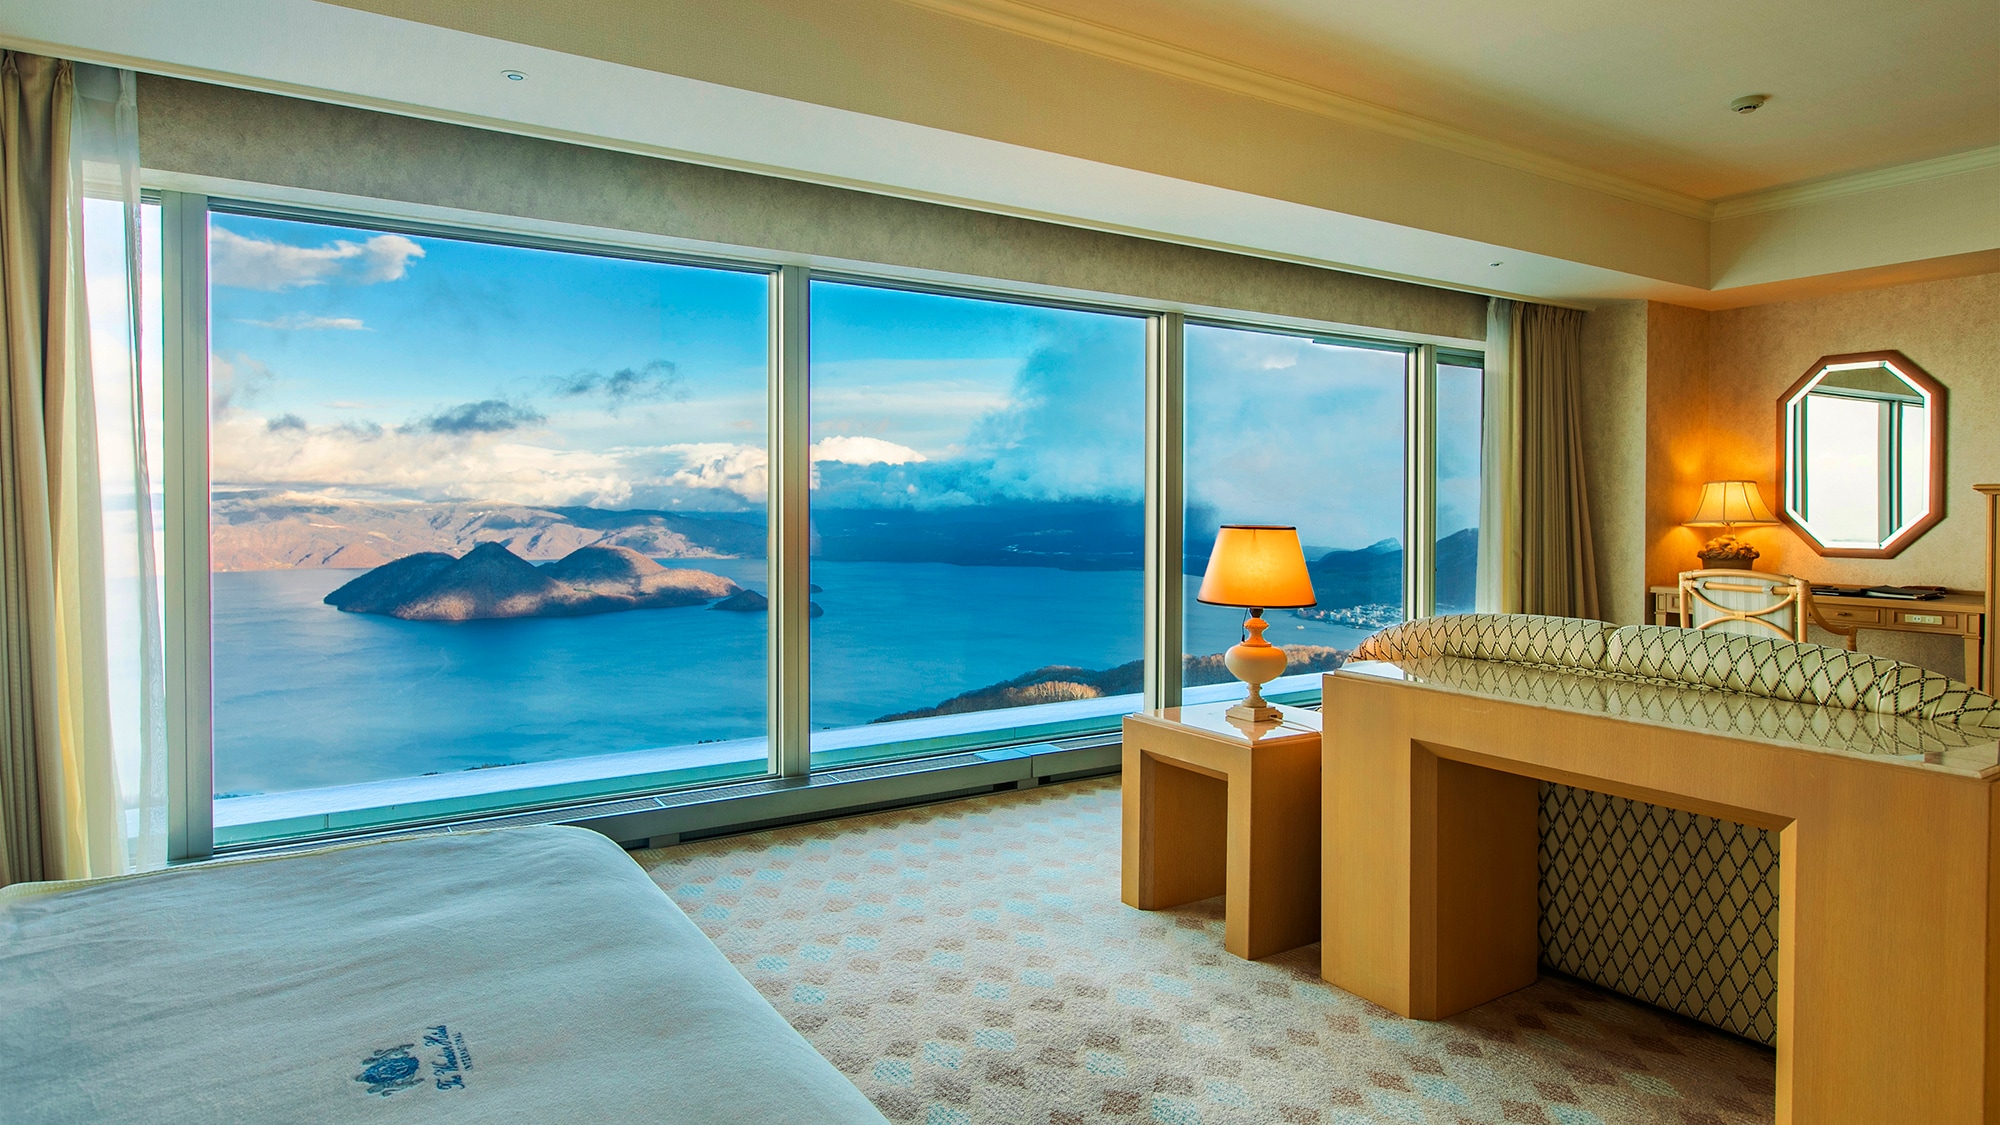 ■ Jr. Suite ■ A room overlooking Lake Toya from the bed. The morning scenery you see when you wake up is just the beauty of your eyes.